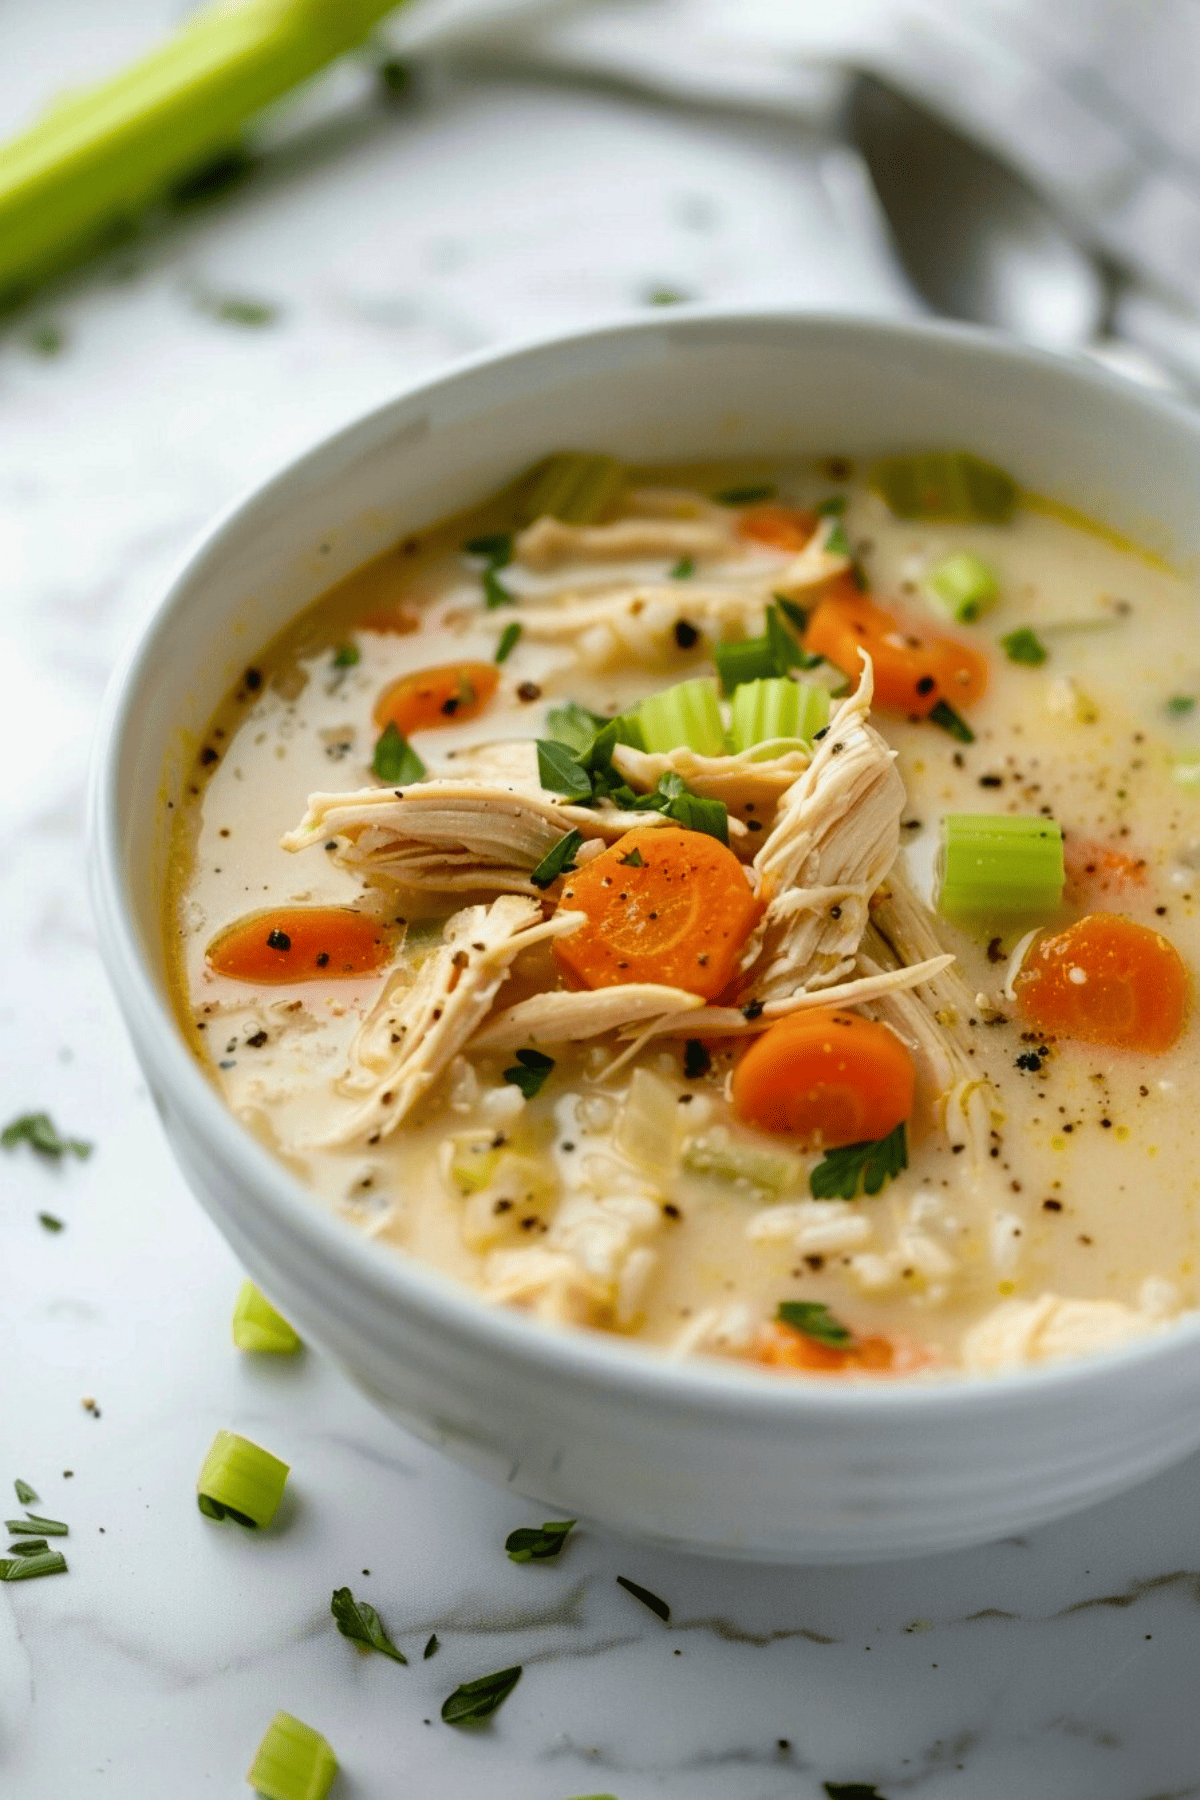 Chicken lemon rice soup served on a white bowl with carrots and celery.